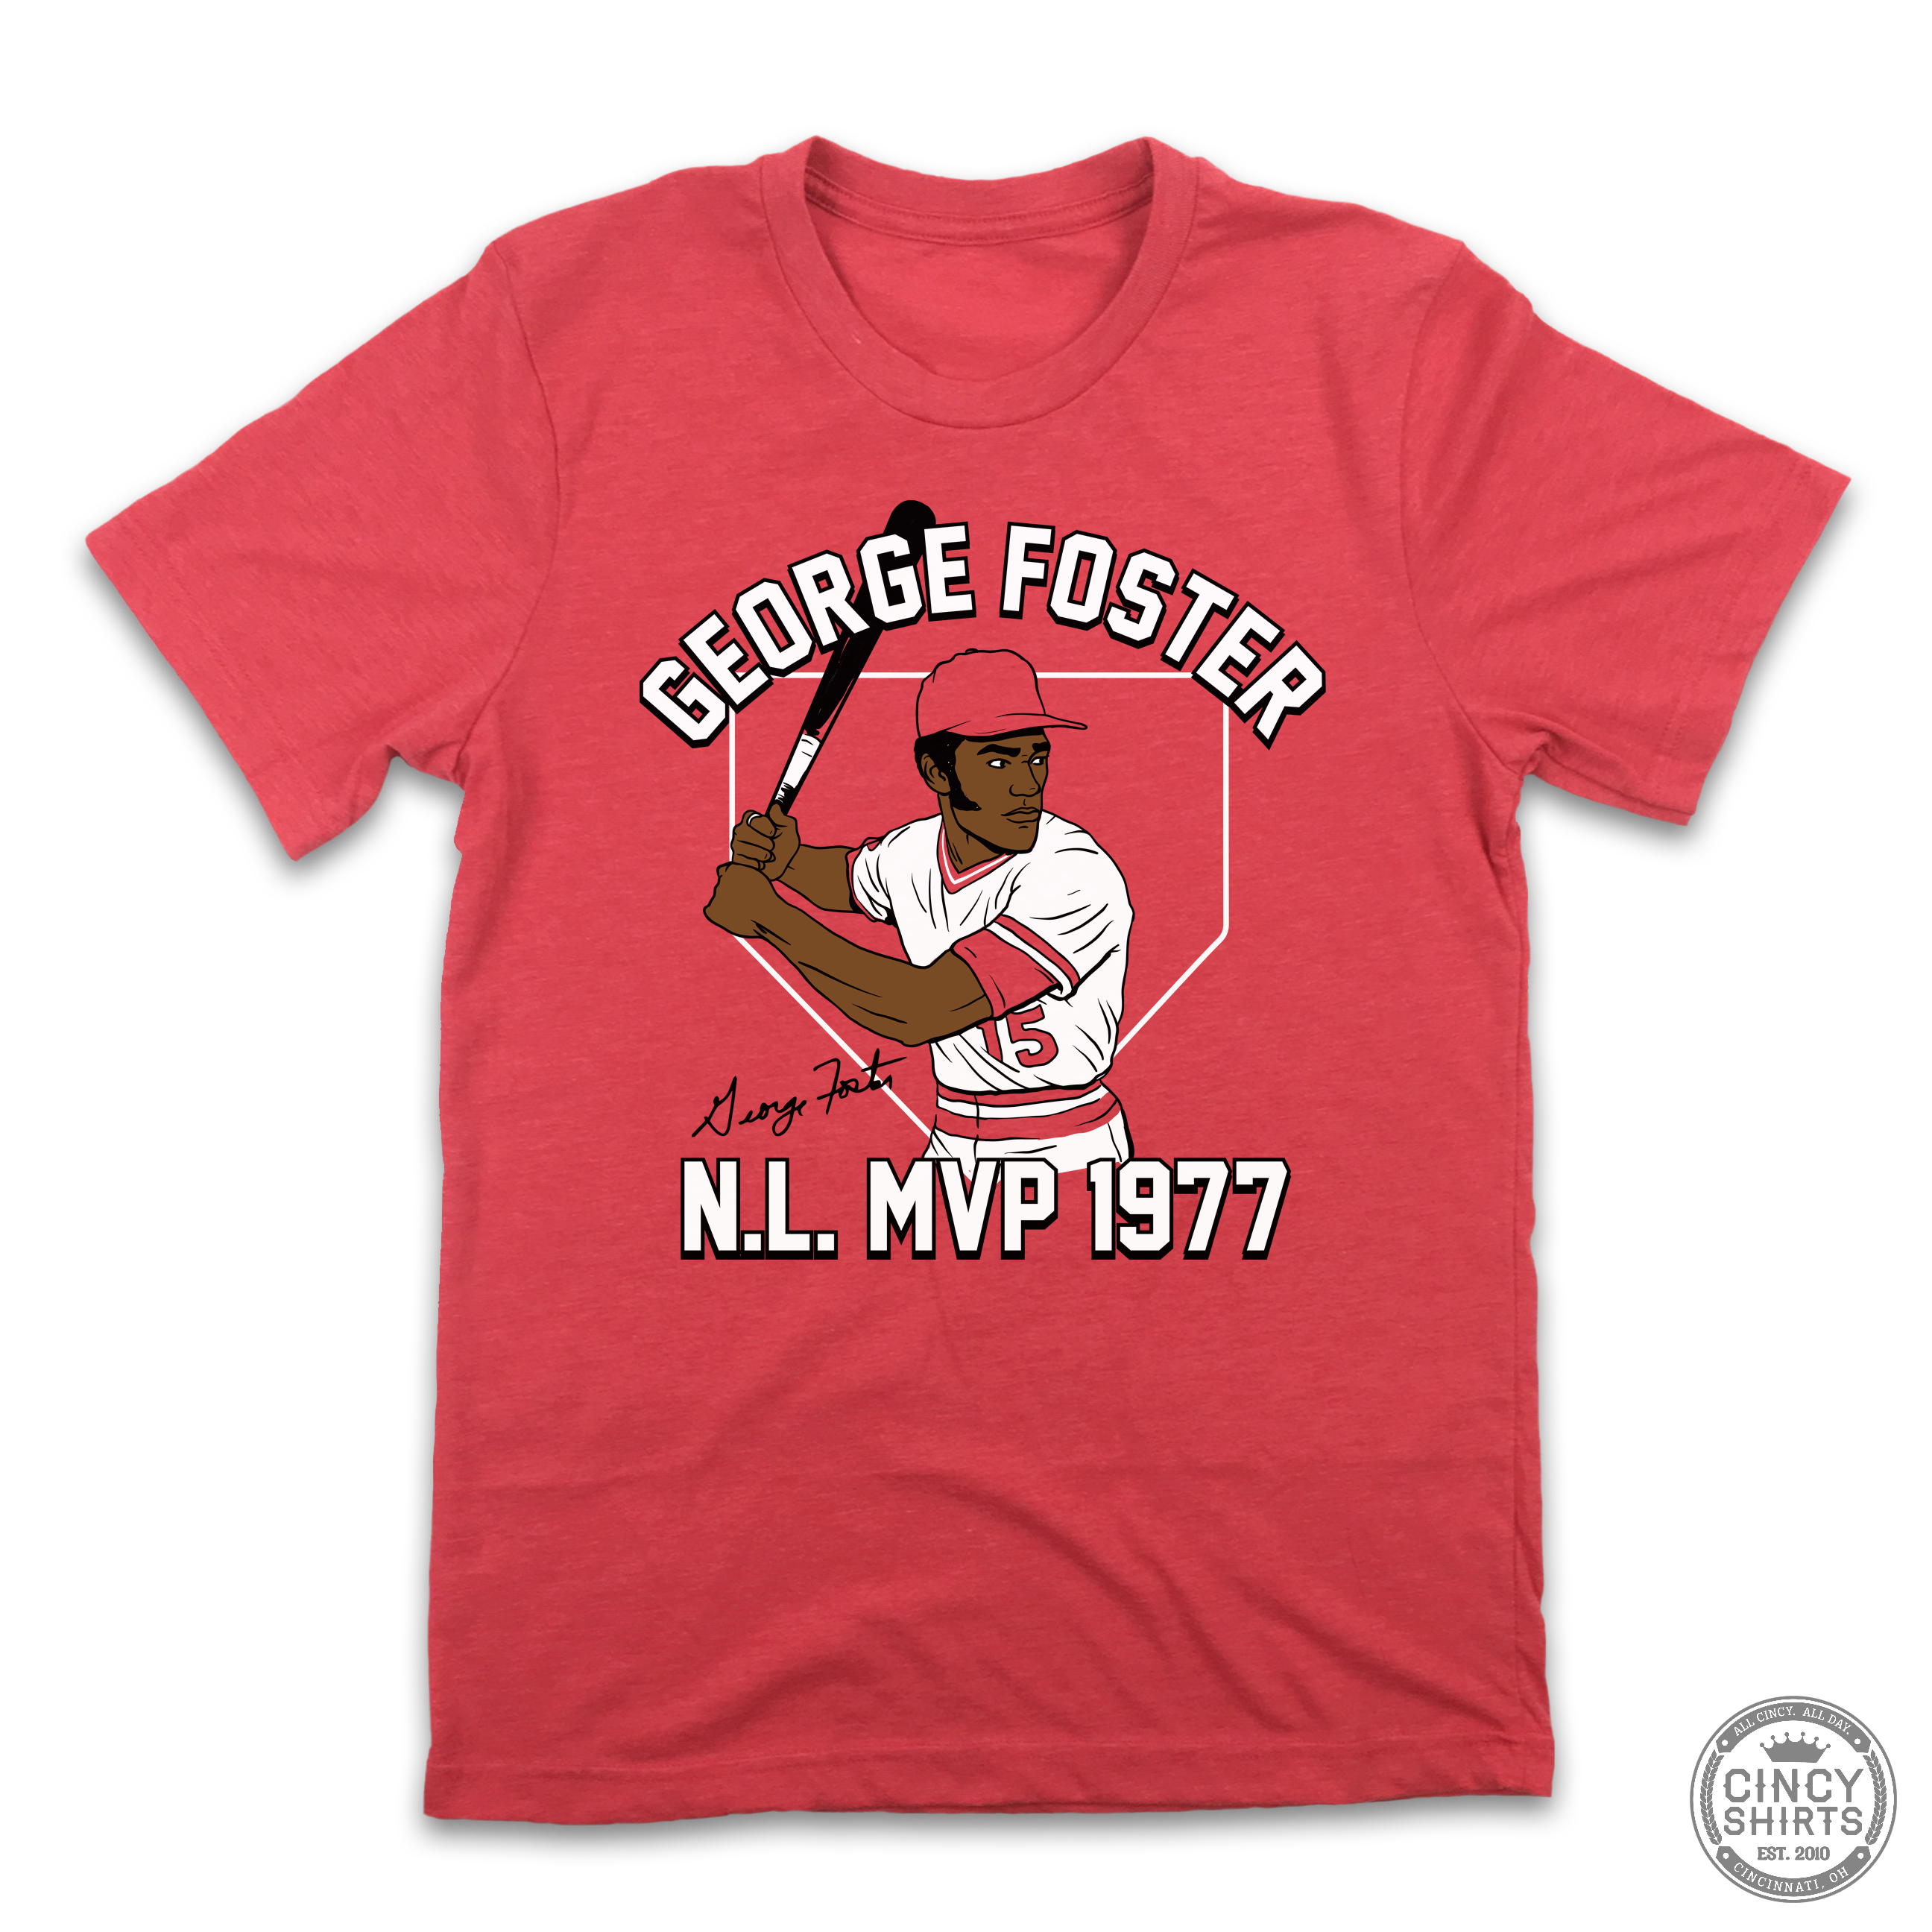 Cincinnati Reds - Welcome in George Foster and Cincy's own